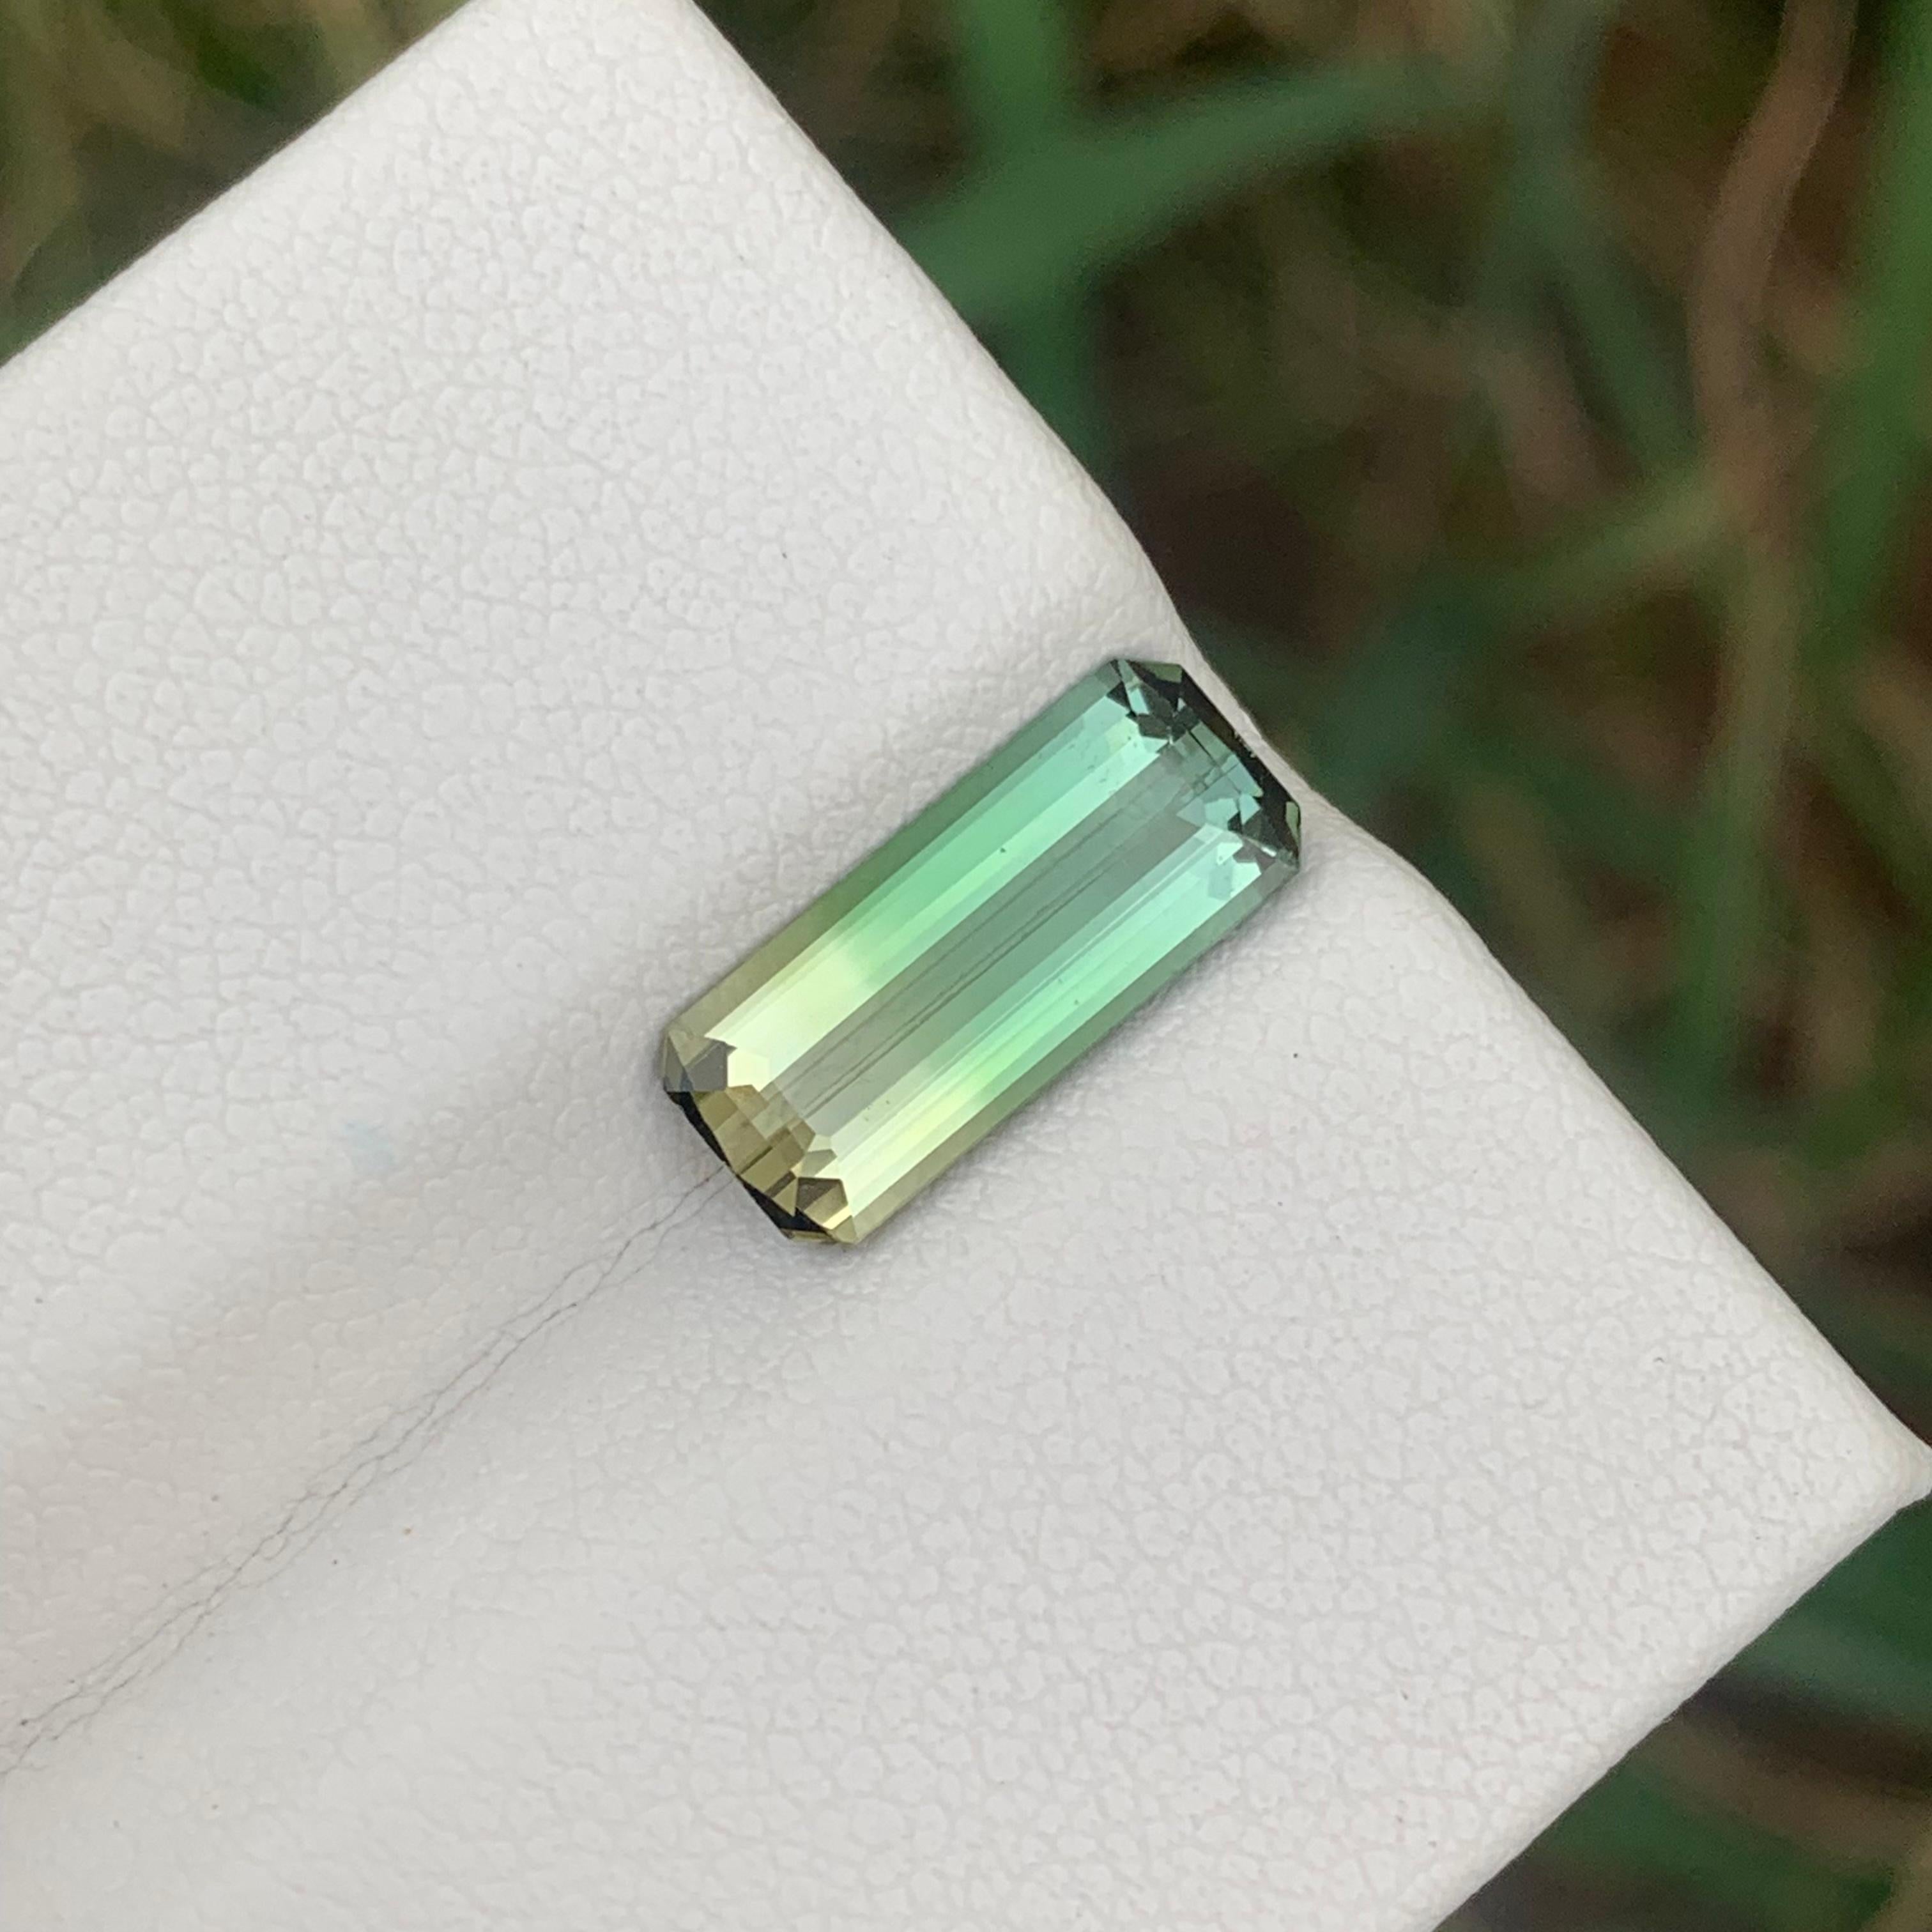 Bicolor Tourmaline 
Weight: 2.70 Carats 
Dimension: 13.9x6x3.9 Mm
Origin: Madagascar Africa 
Color: Green & Yellow 
Treatment: Non
Certificate: On Customer Demand 
Shape: Emerald 
Bicolor tourmaline, a fascinating gemstone composed of two distinct